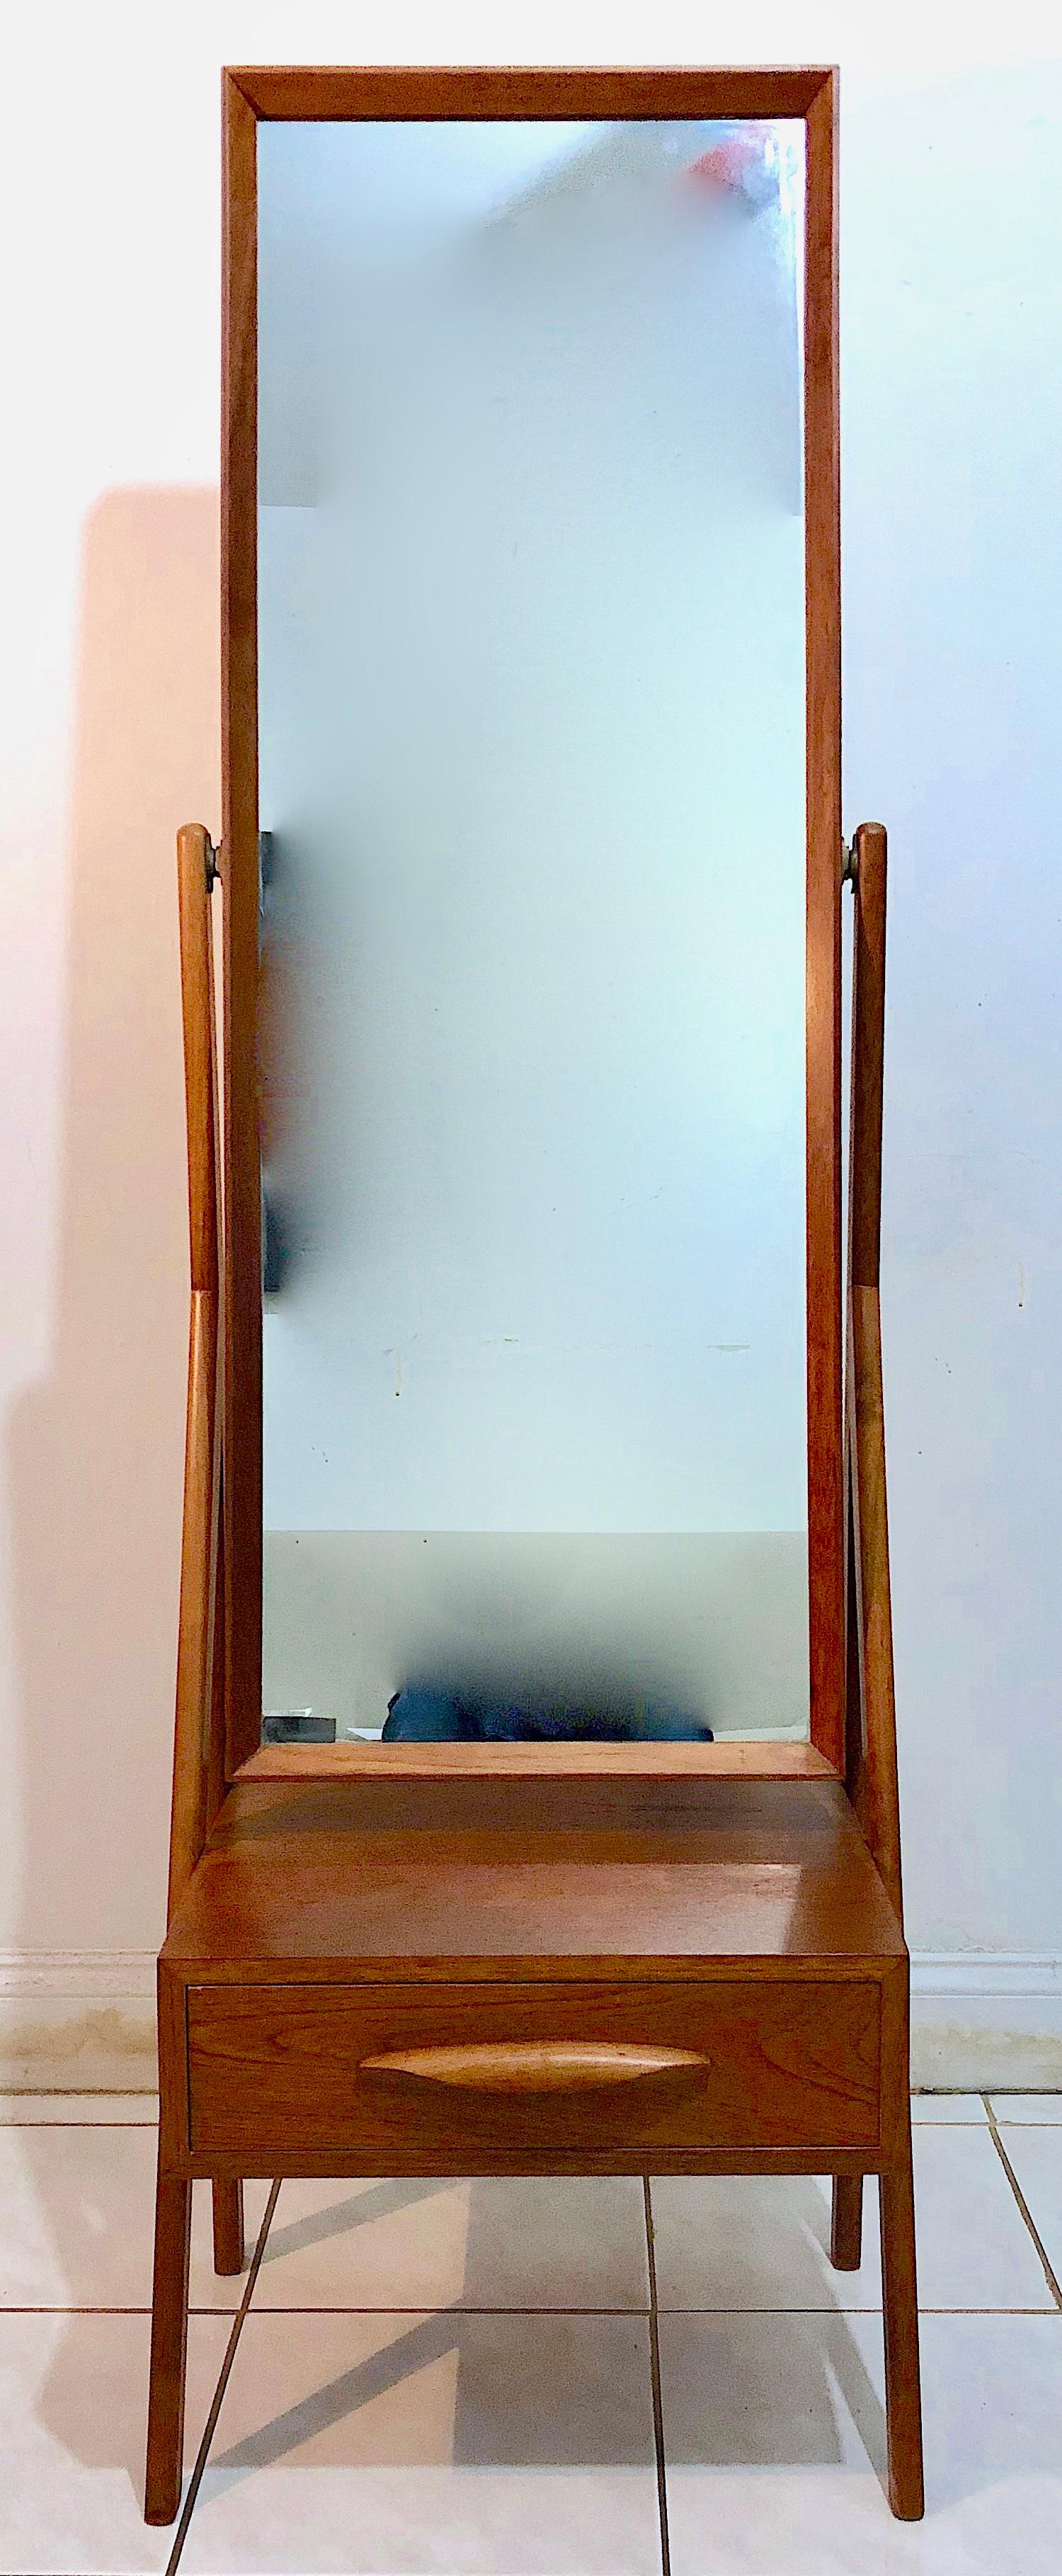 Handsome cheval teak full length dressing mirror with small table and drawer. The mirror swivels. Very nicely designed and detailed.